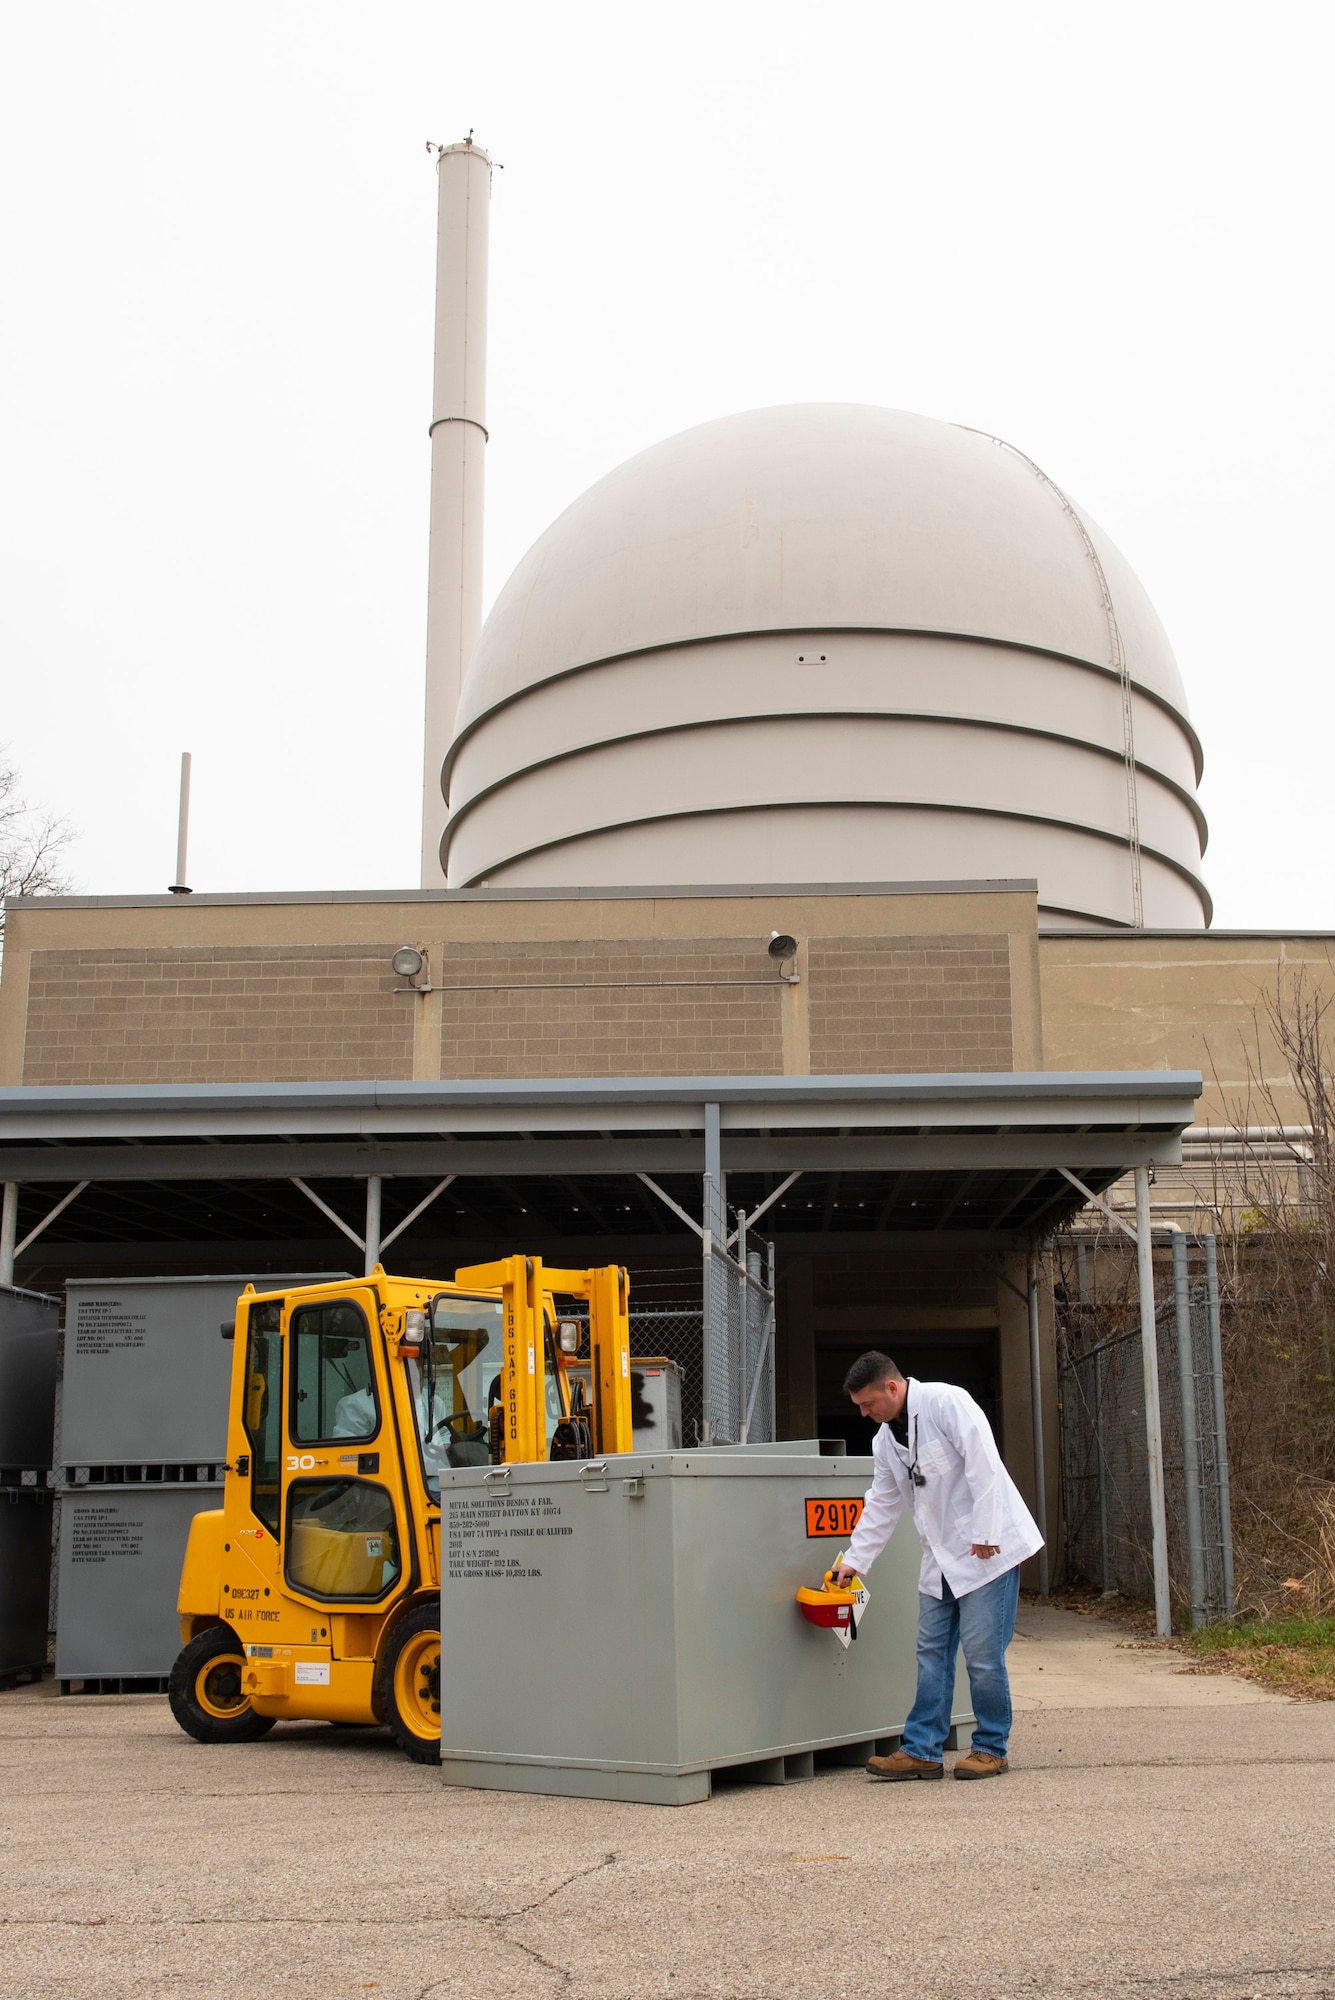 Seth Walton uses a pressurized ionization chamber to assess the radiation dose rate of a container holding radioactive material outside of the Air Force Radioactive Recycling and Disposal facility, Dec. 1, 2021 at Wright-Patterson Air Force Base, Ohio. Radiation dose rate measurements are taken to ensure they fall below the U.S. Department of Transportation’s allowable rate in order to ship low specific activity packages. (U.S. Air Force photo by Jaima Fogg)